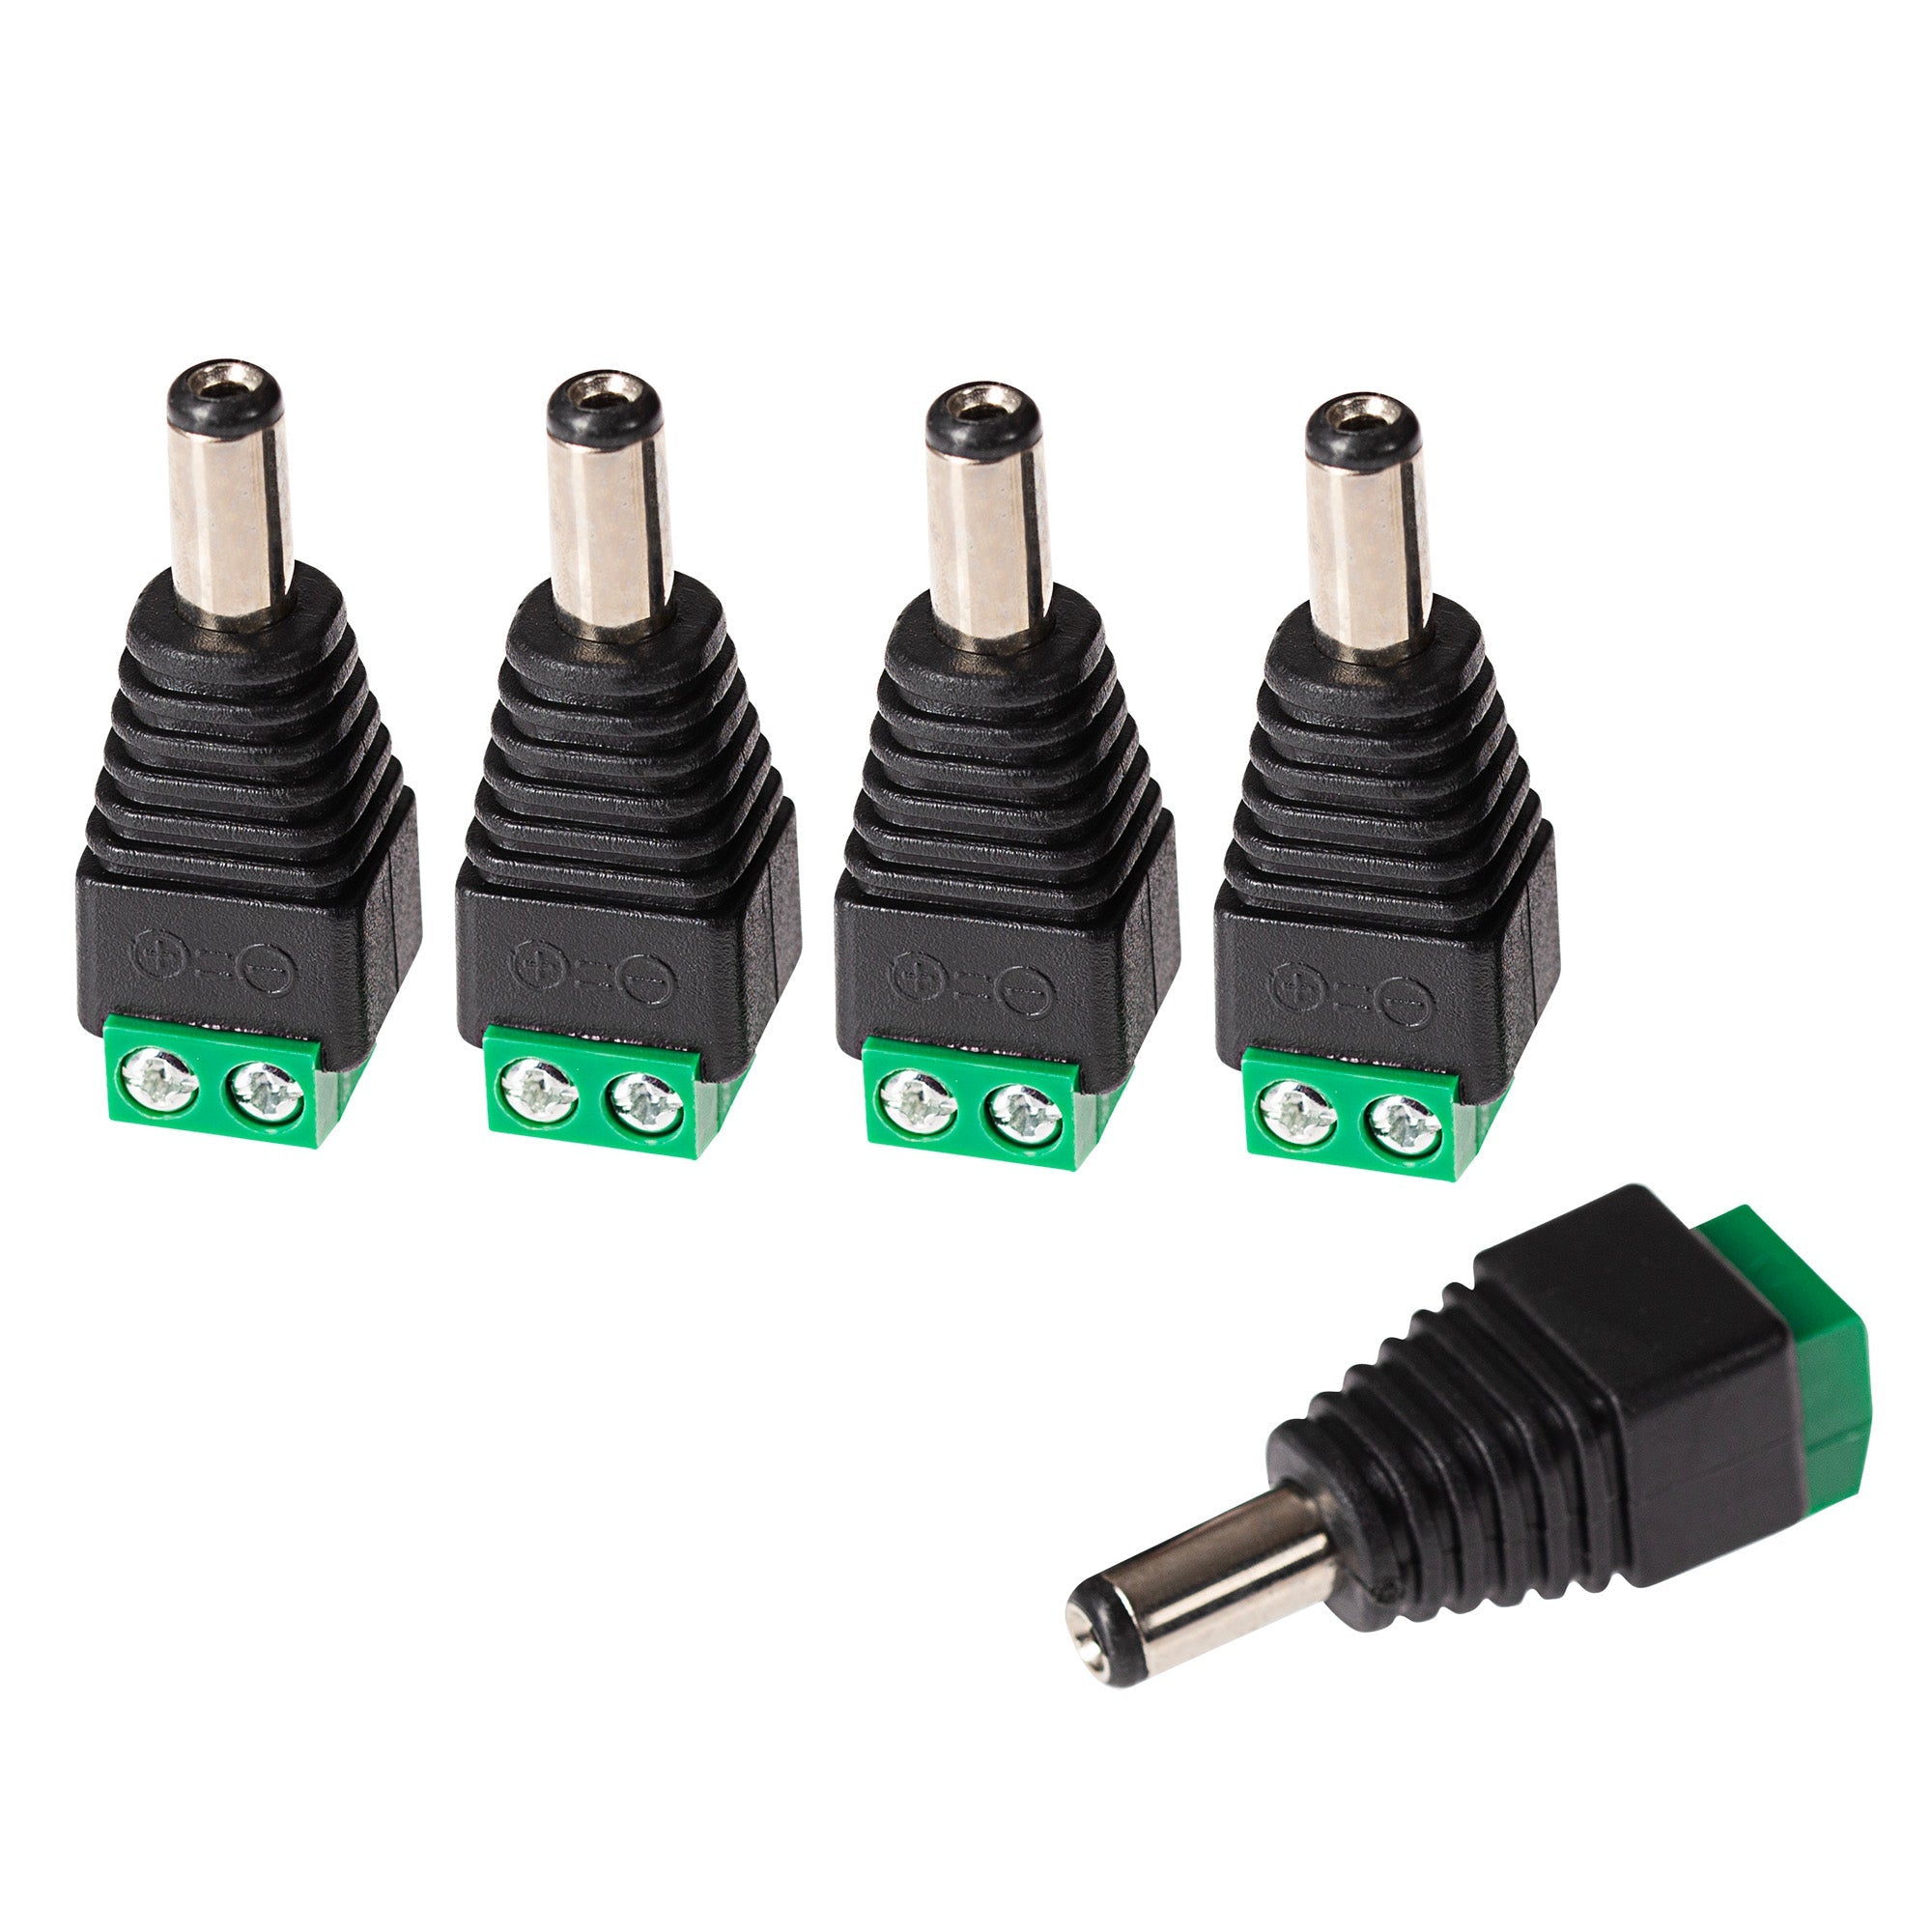 Maplin Male DC to Twin Cable to 5.5 x 2.1mm DC Power Plug for CCTV - Black, Pack of 5